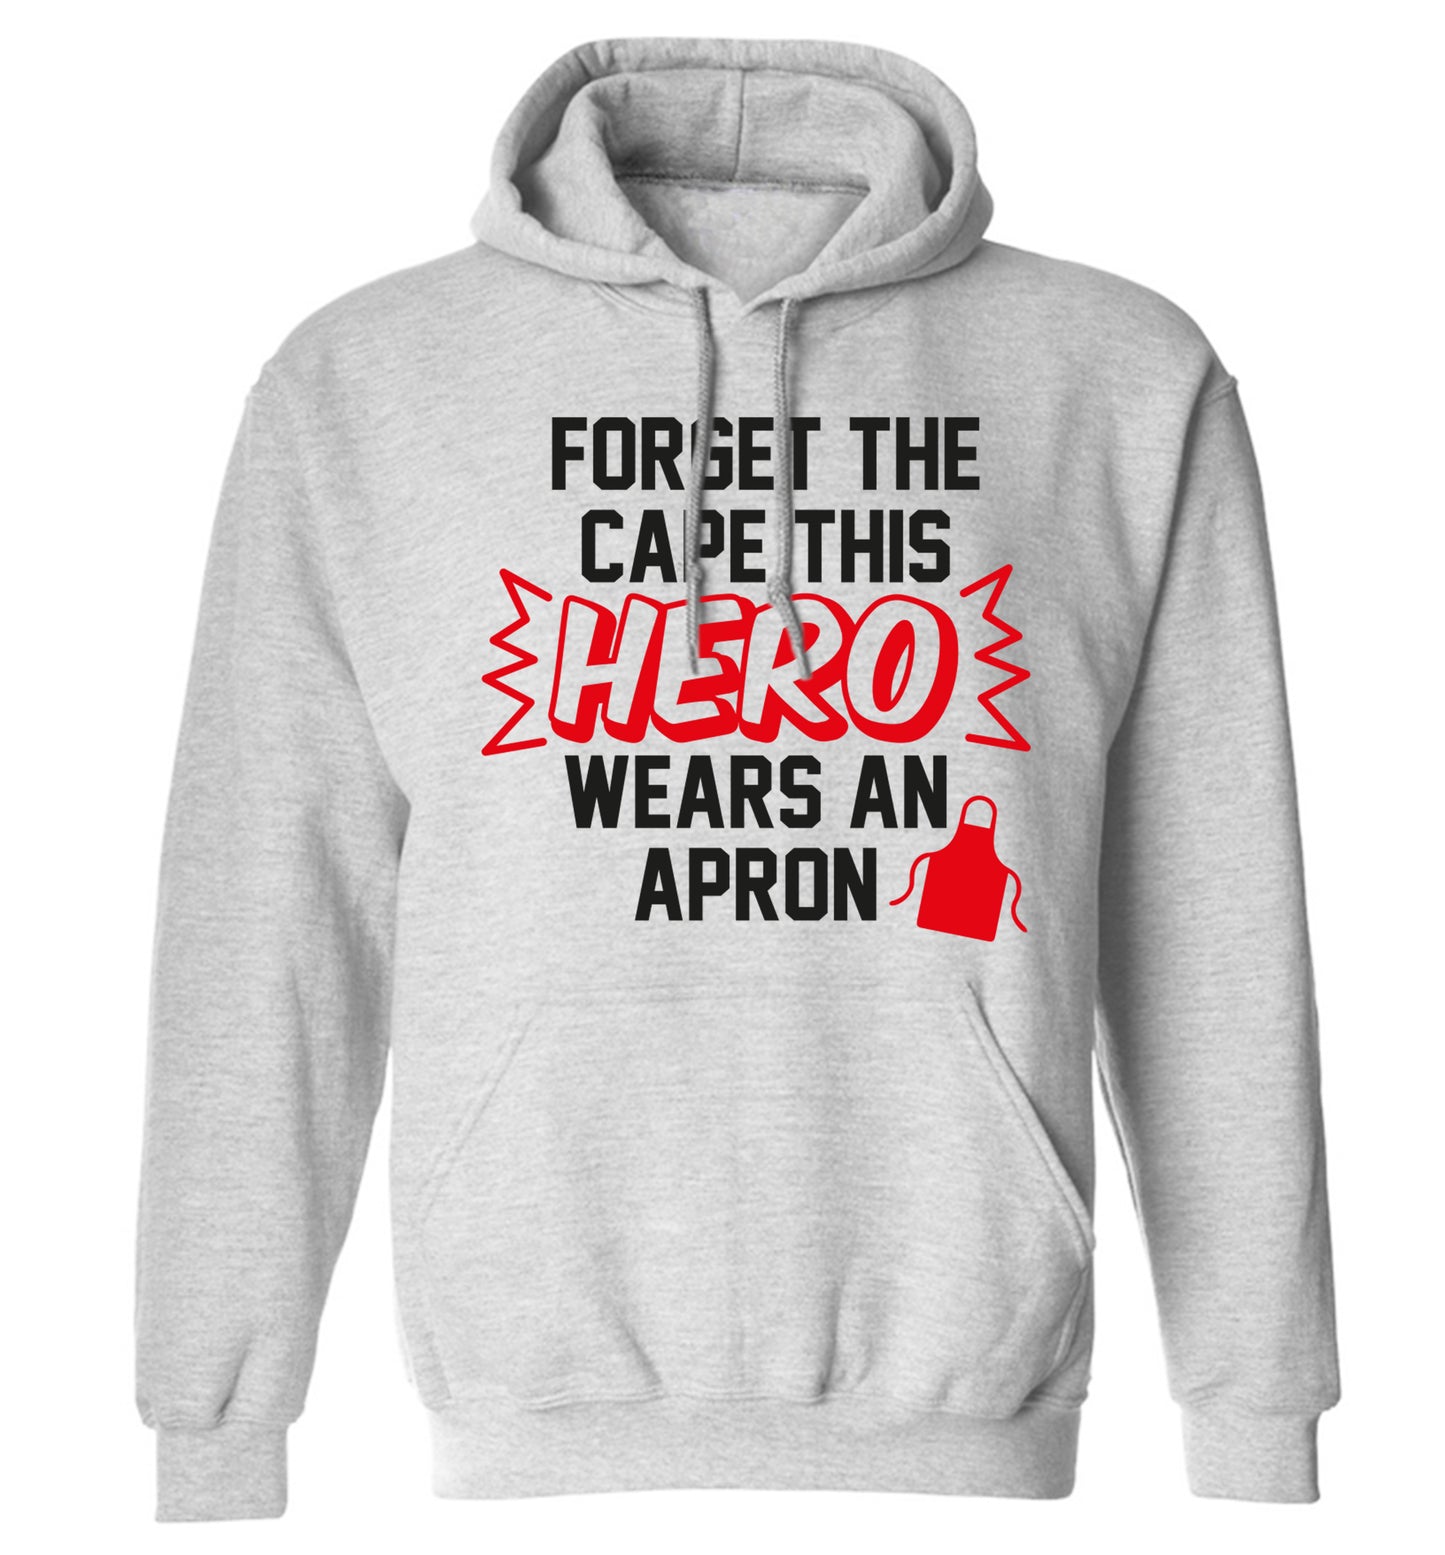 Forget the cape this hero wears an apron adults unisex grey hoodie 2XL